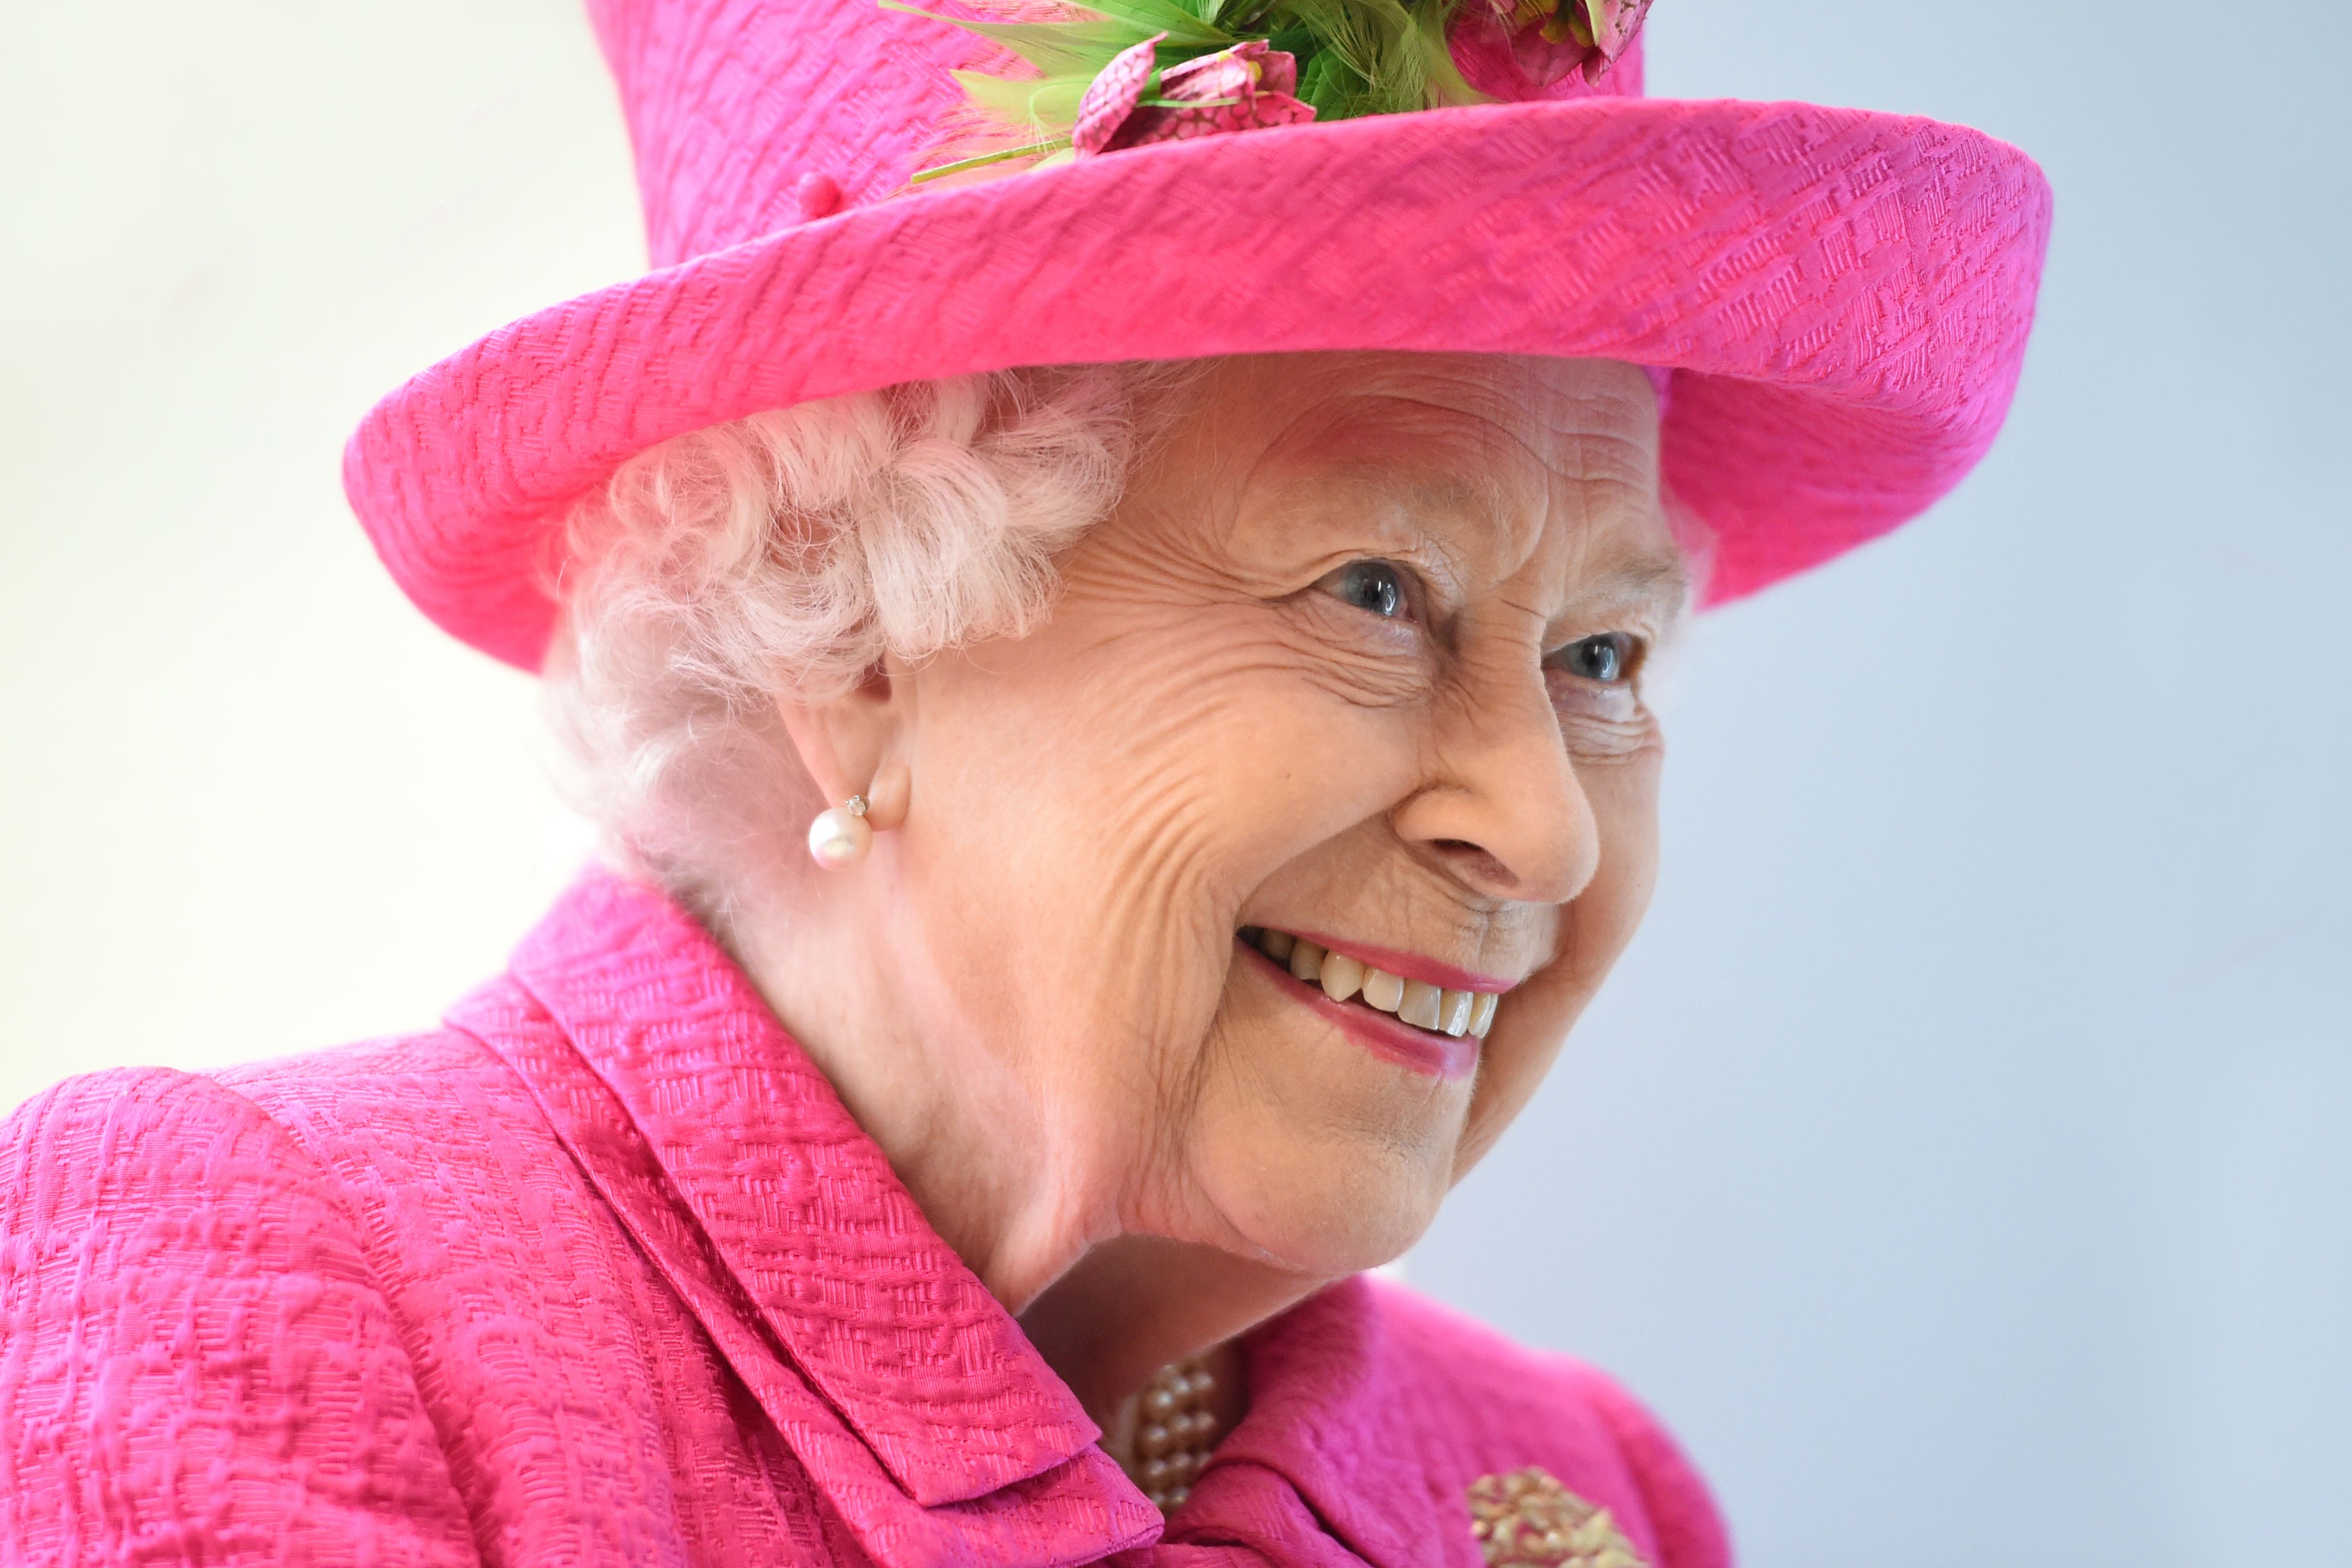 How Queen Elizabeth II made the most of life in a healthy, stable